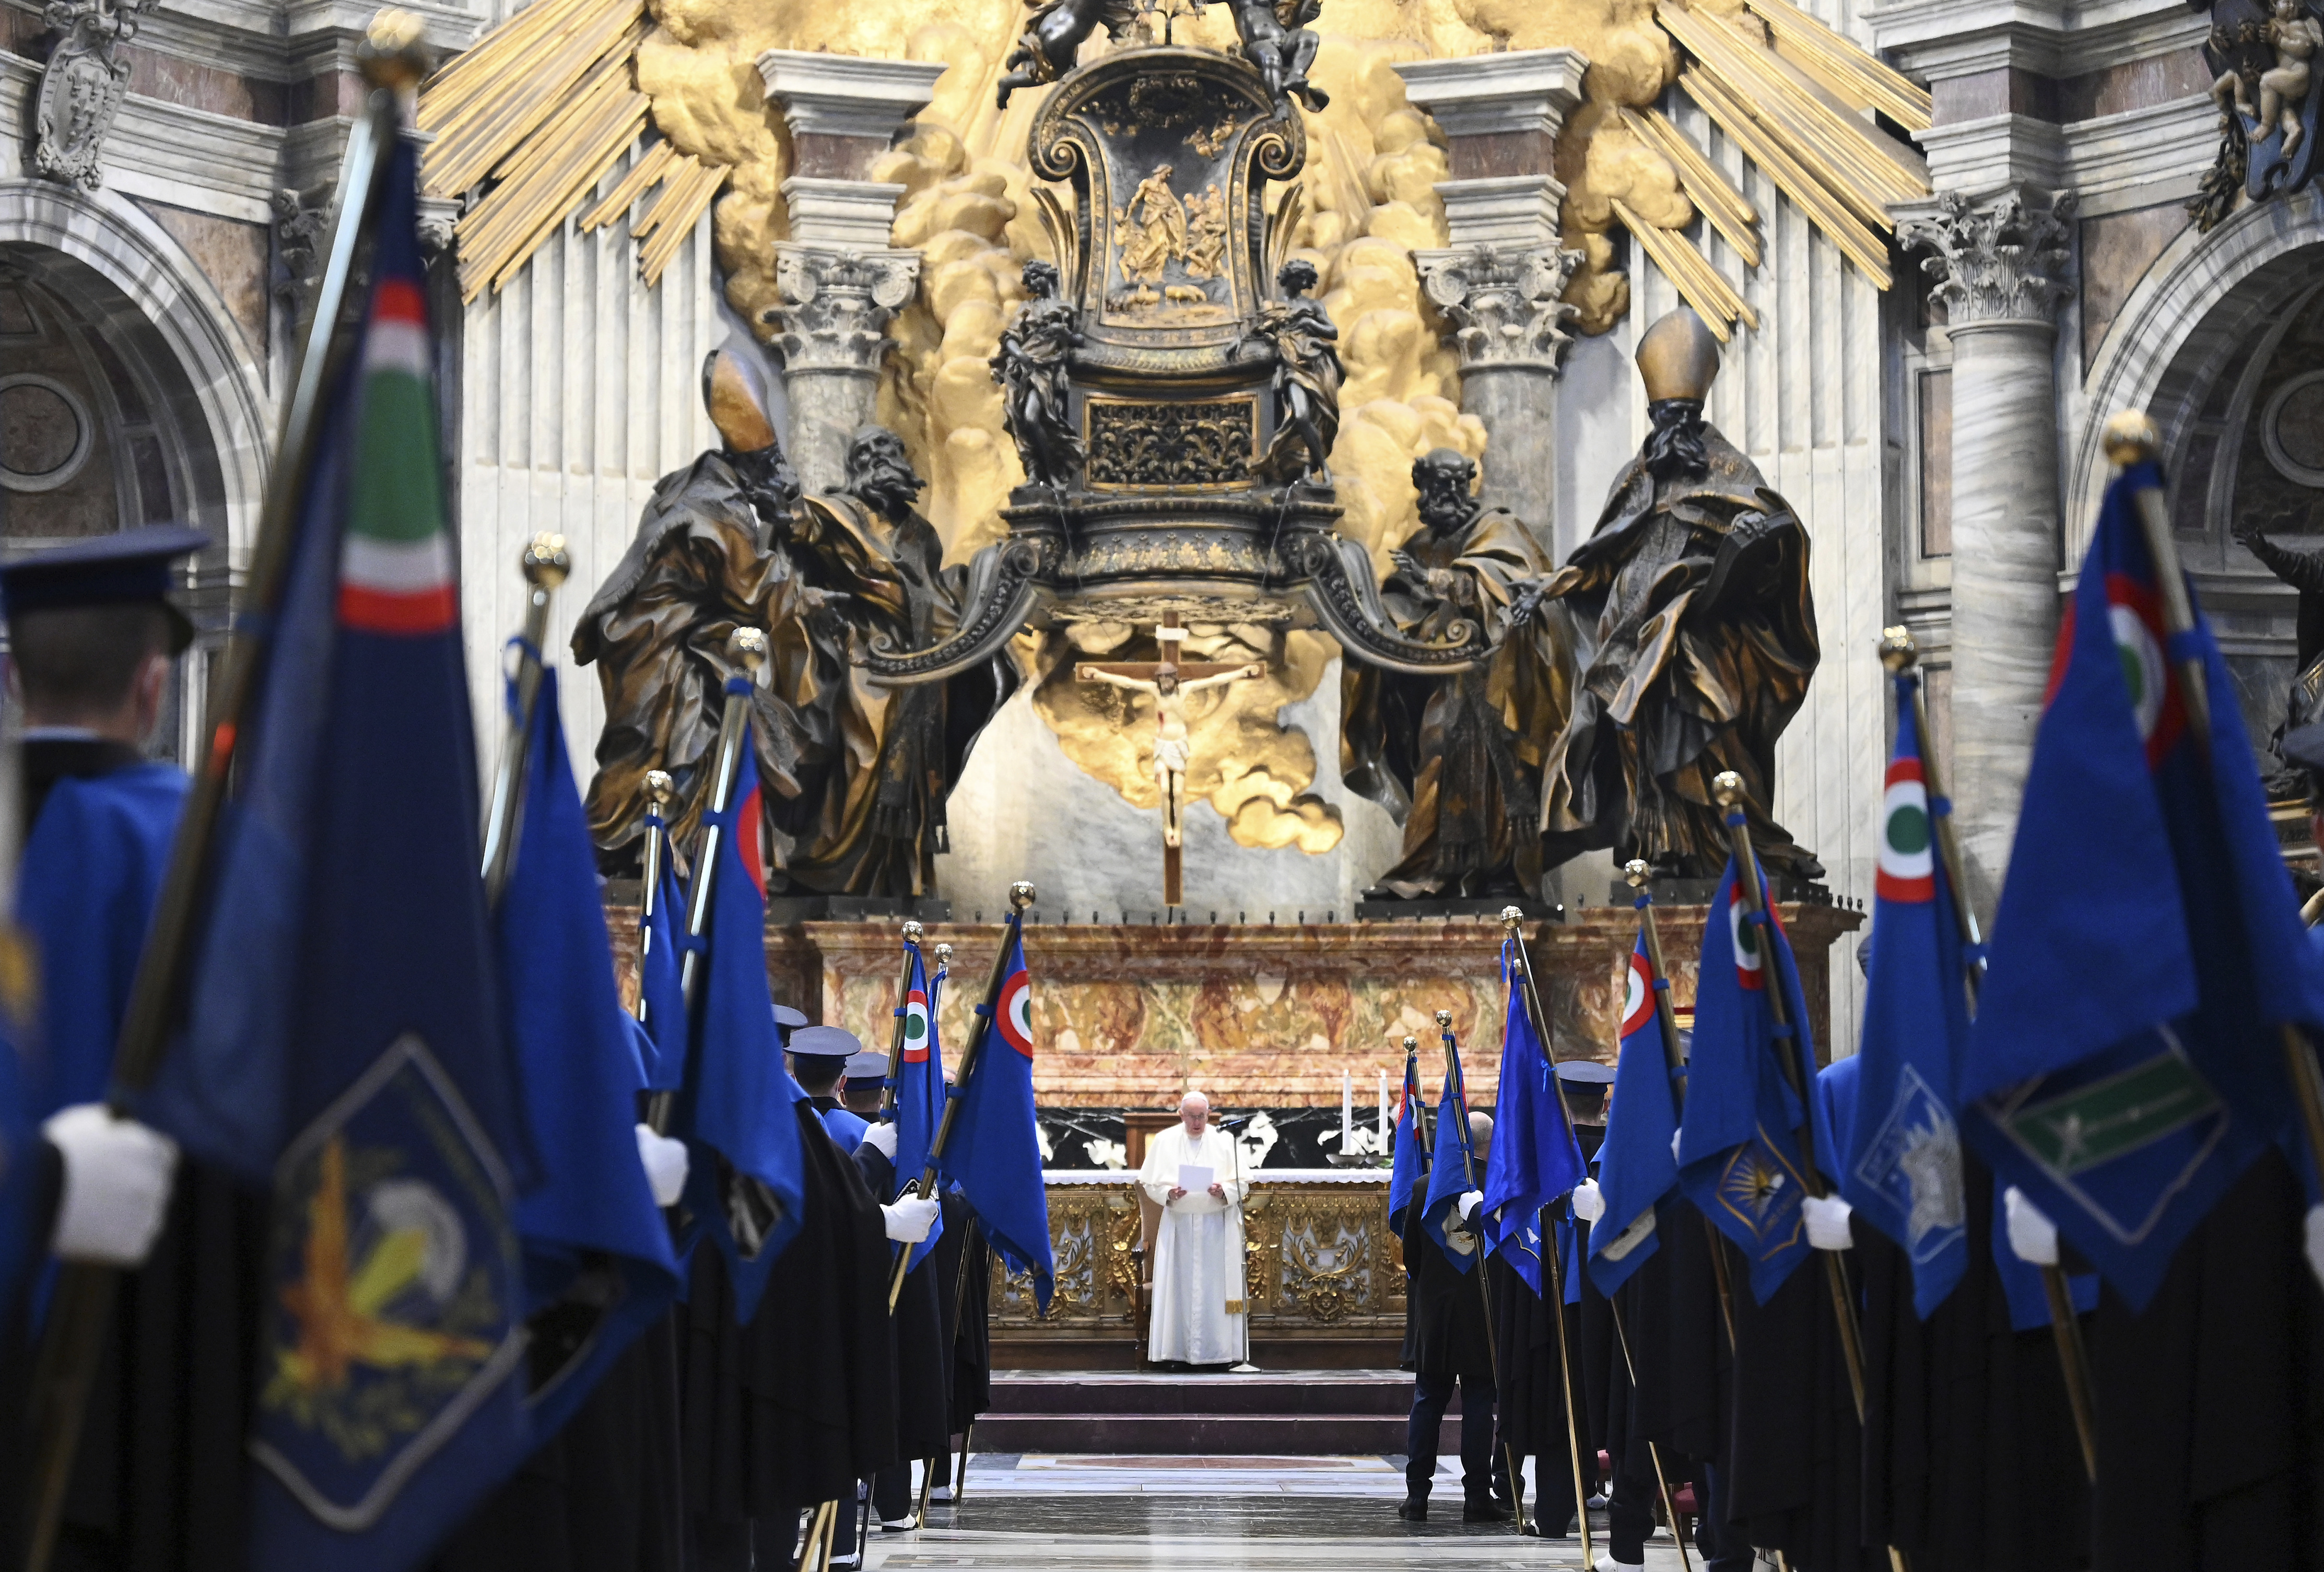 Pope Francis delivers his speech during an audience with members of the Italian Air Force, in St. Peter's Basilica at the Vatican, Friday, Dec. 10, 2021. (Vincenzo Pinto/Pool photo via AP)